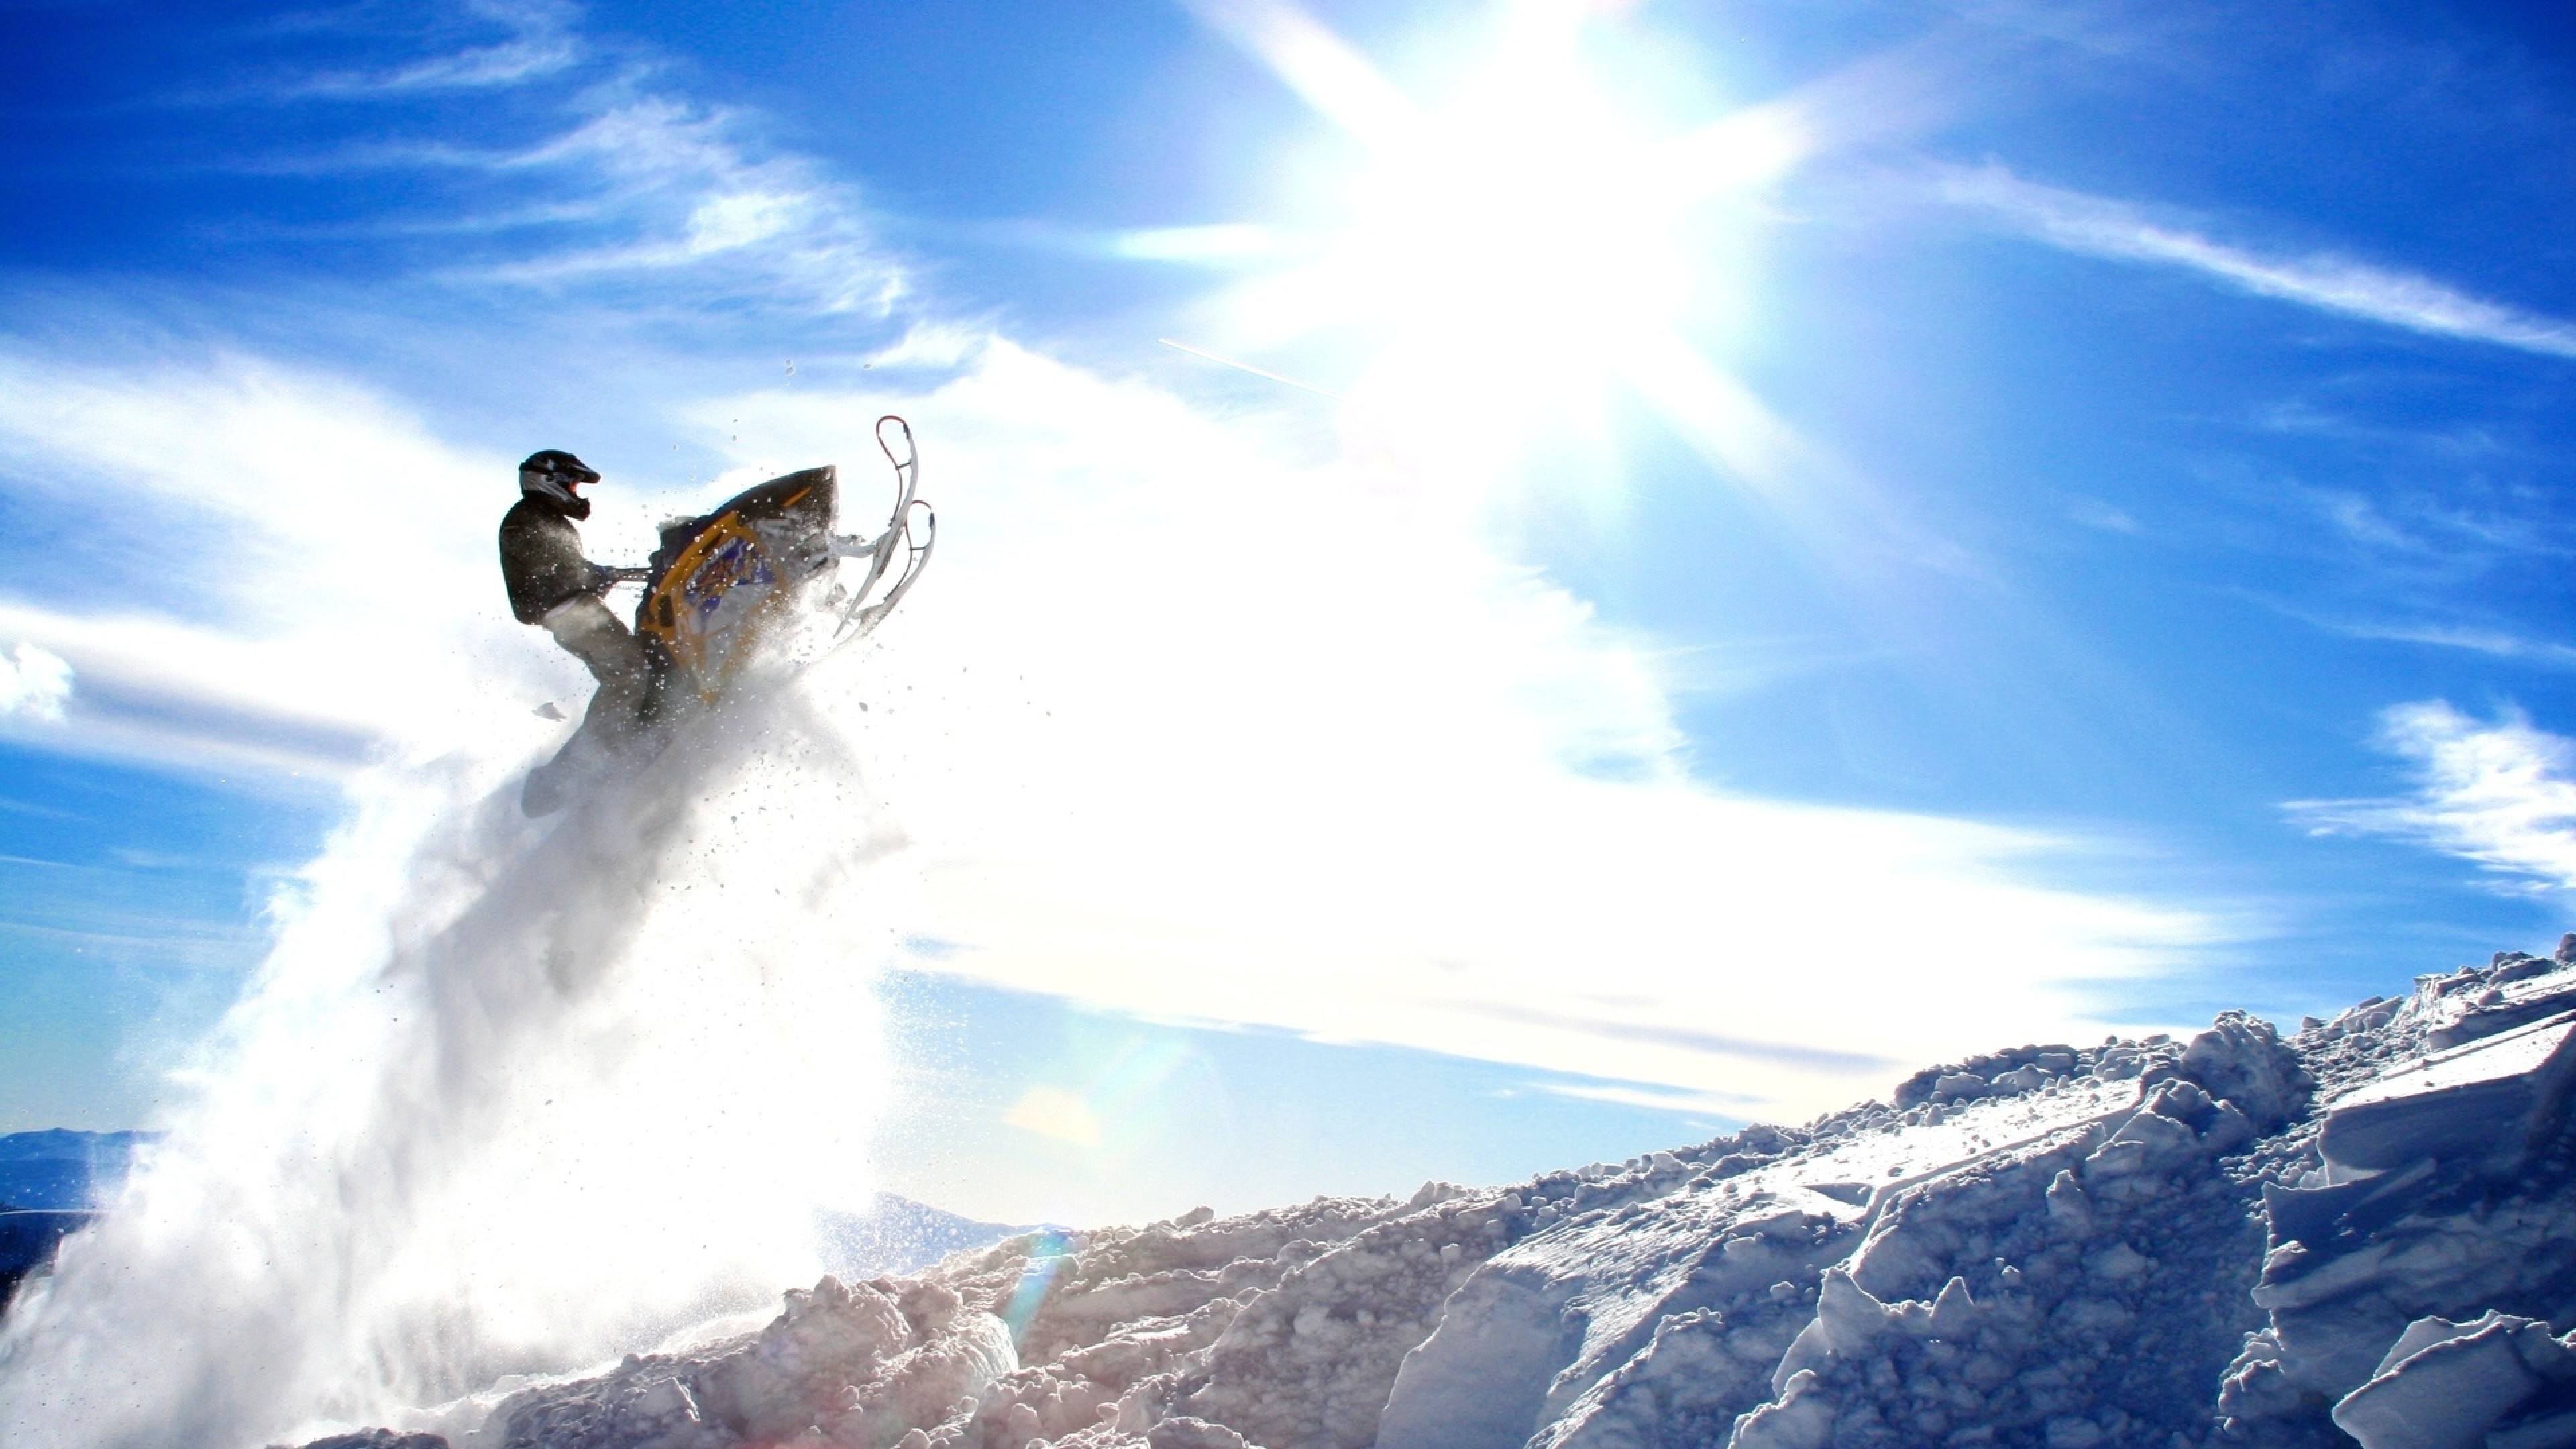 General 3840x2160 snowmobile mountains snow jumping sky